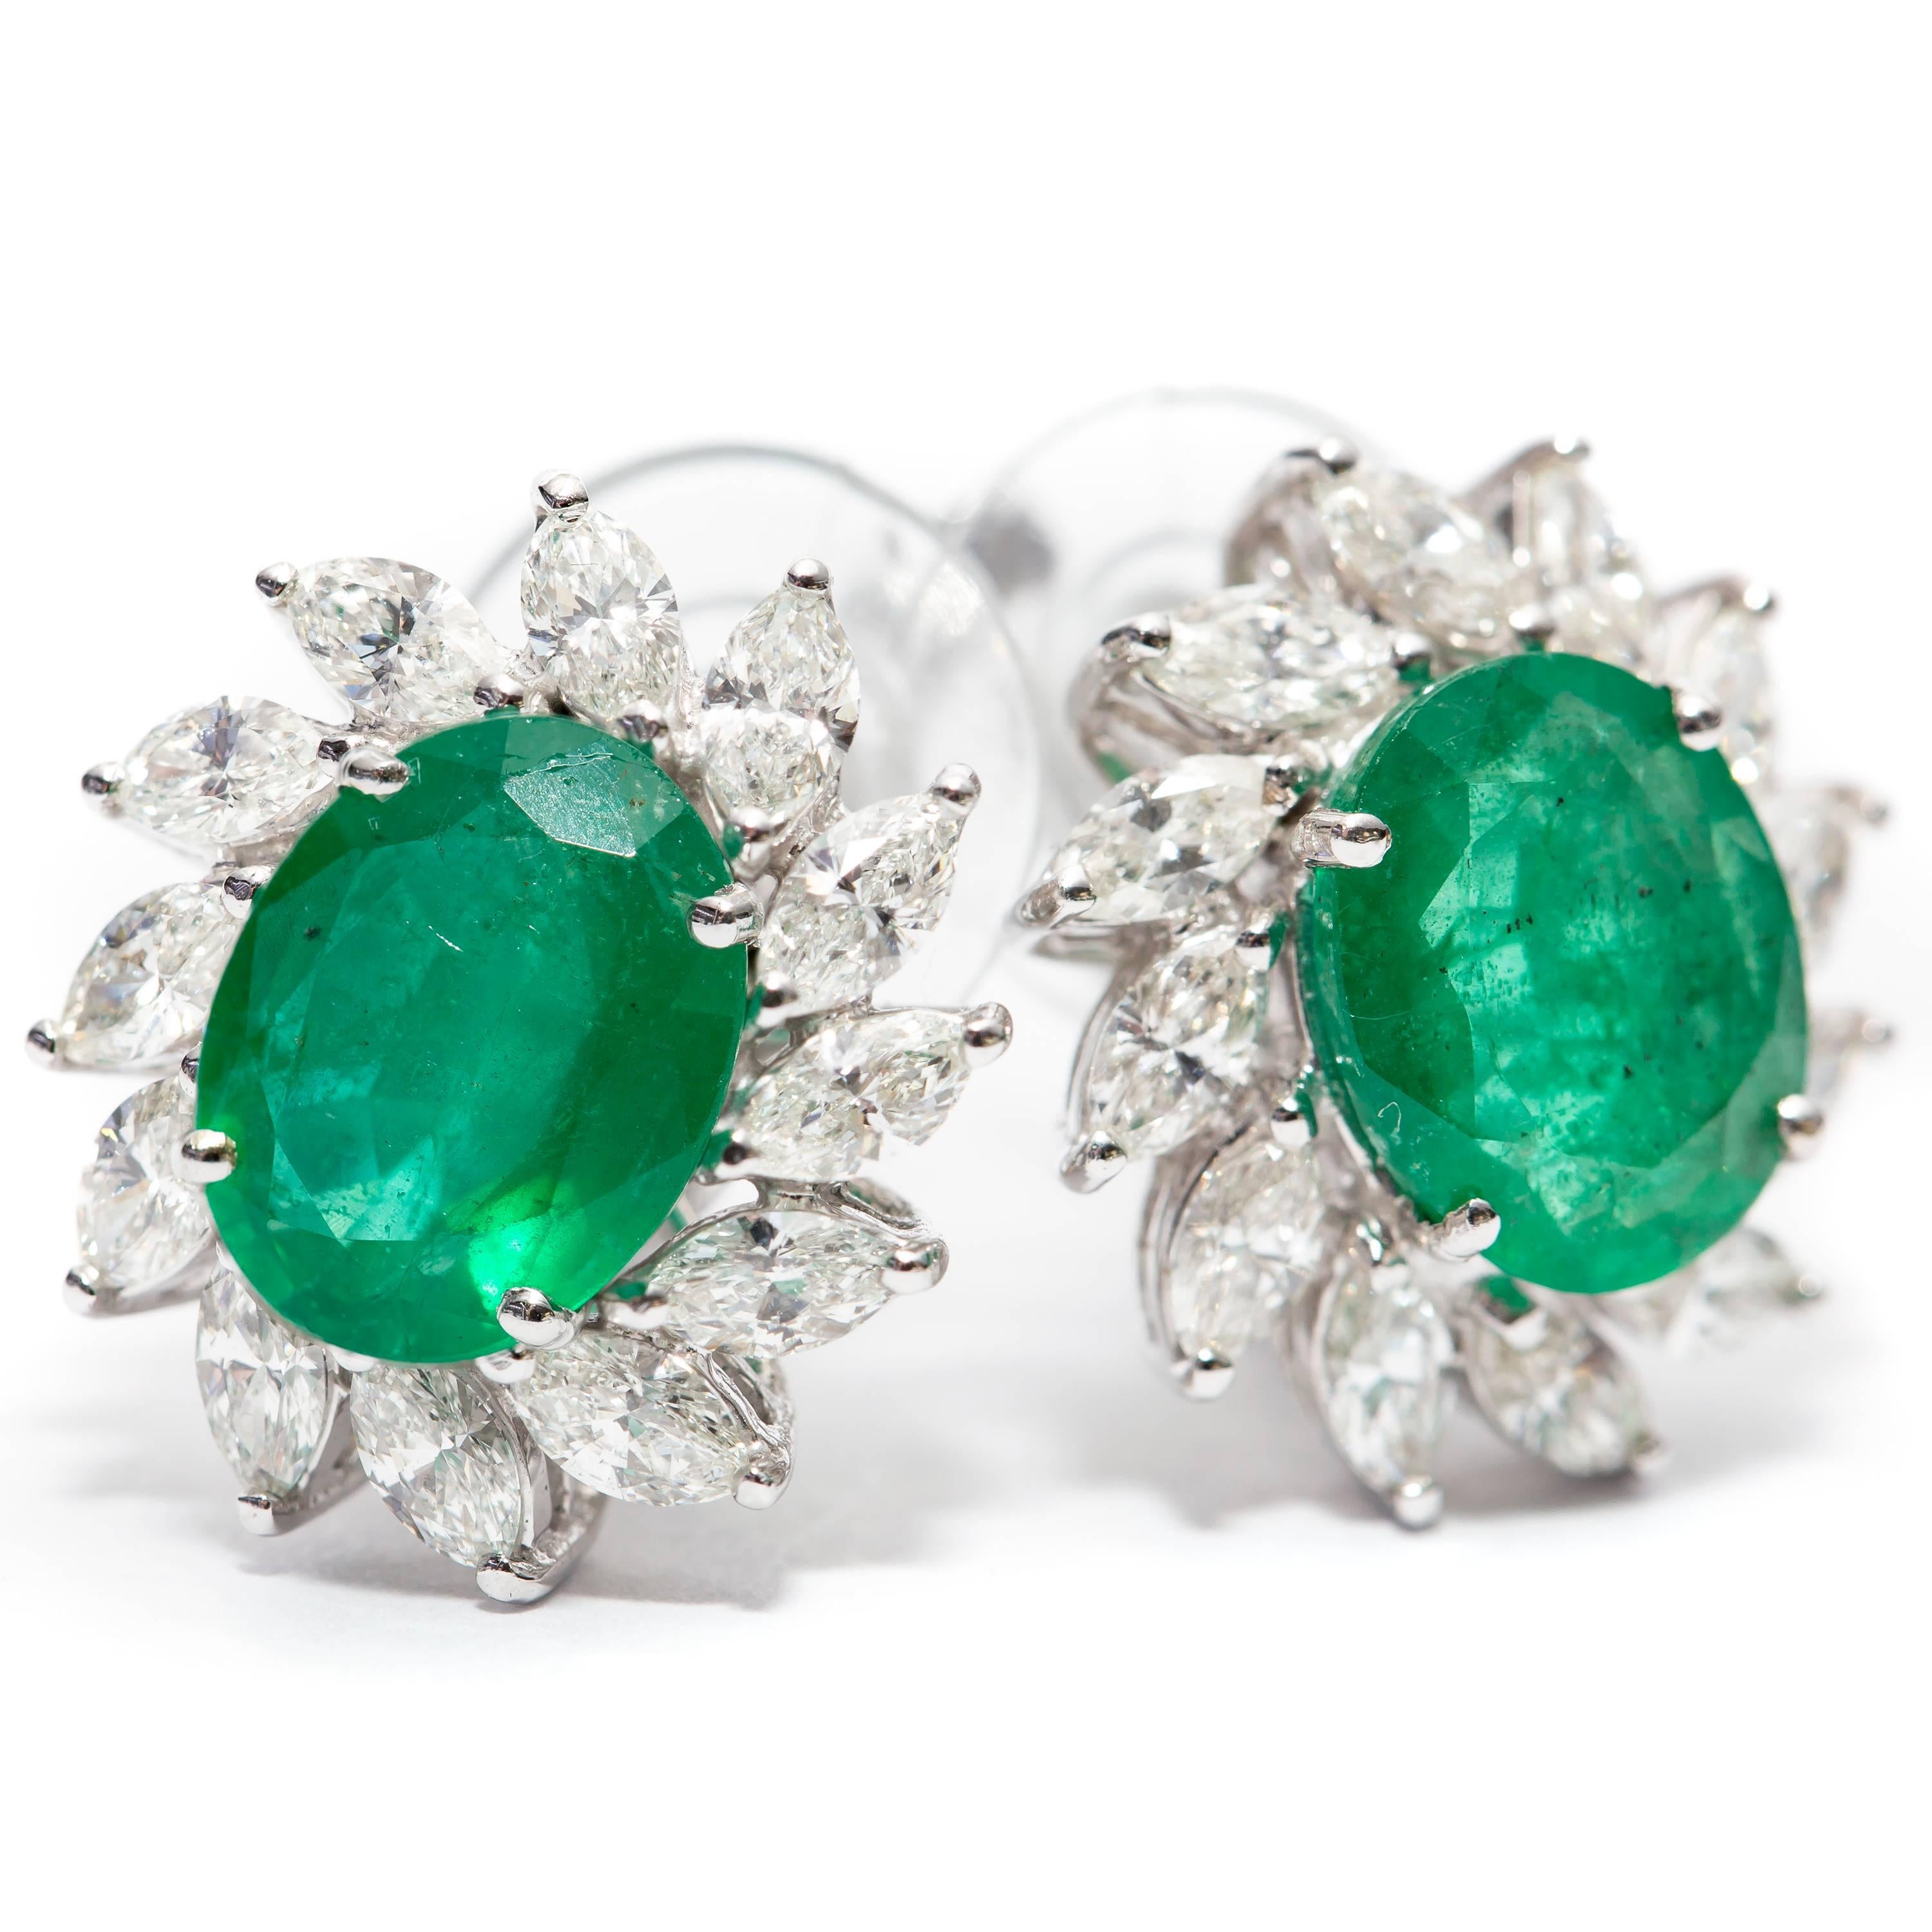 Glowing green, a bespoke green oval shape emerald, having a total weight of approximately 3.50 carats 9x6mm, our high jewellery earrings will be tailored to your specifications with a wonderful combination of shapes, natural marquise diamonds and